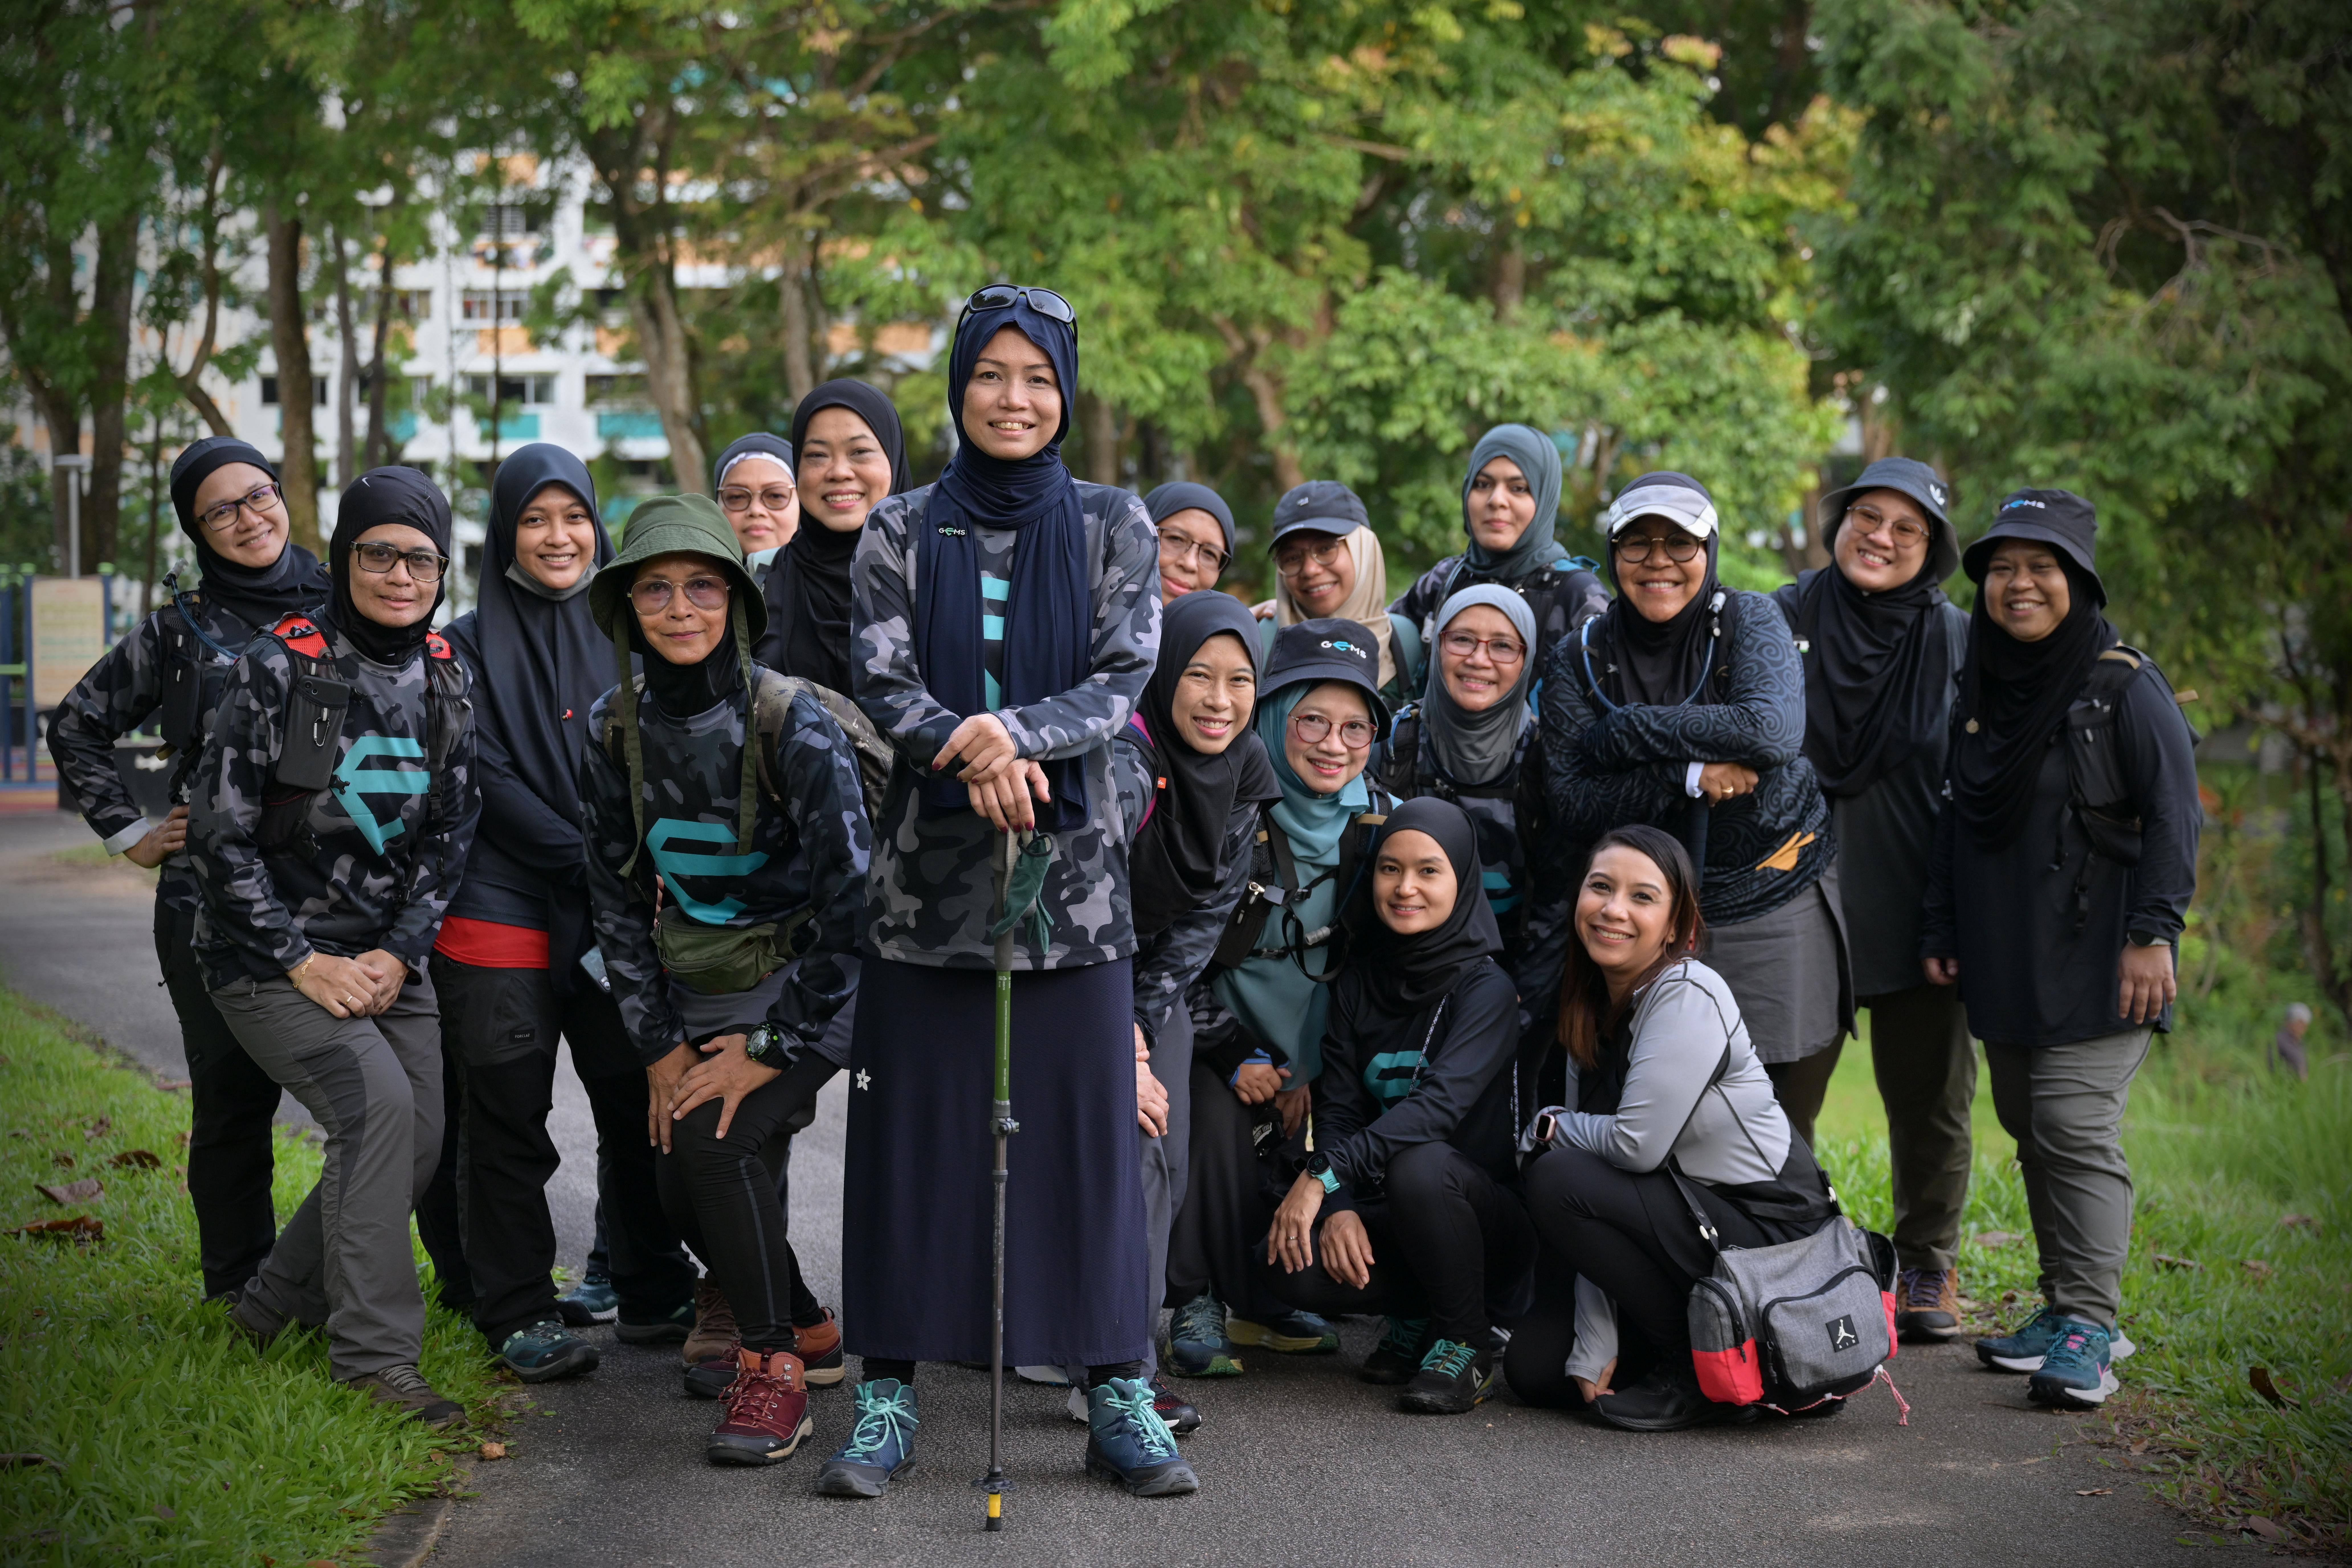 Former army captain Muzdalifah Anuar’s club gets women out and about to do sport